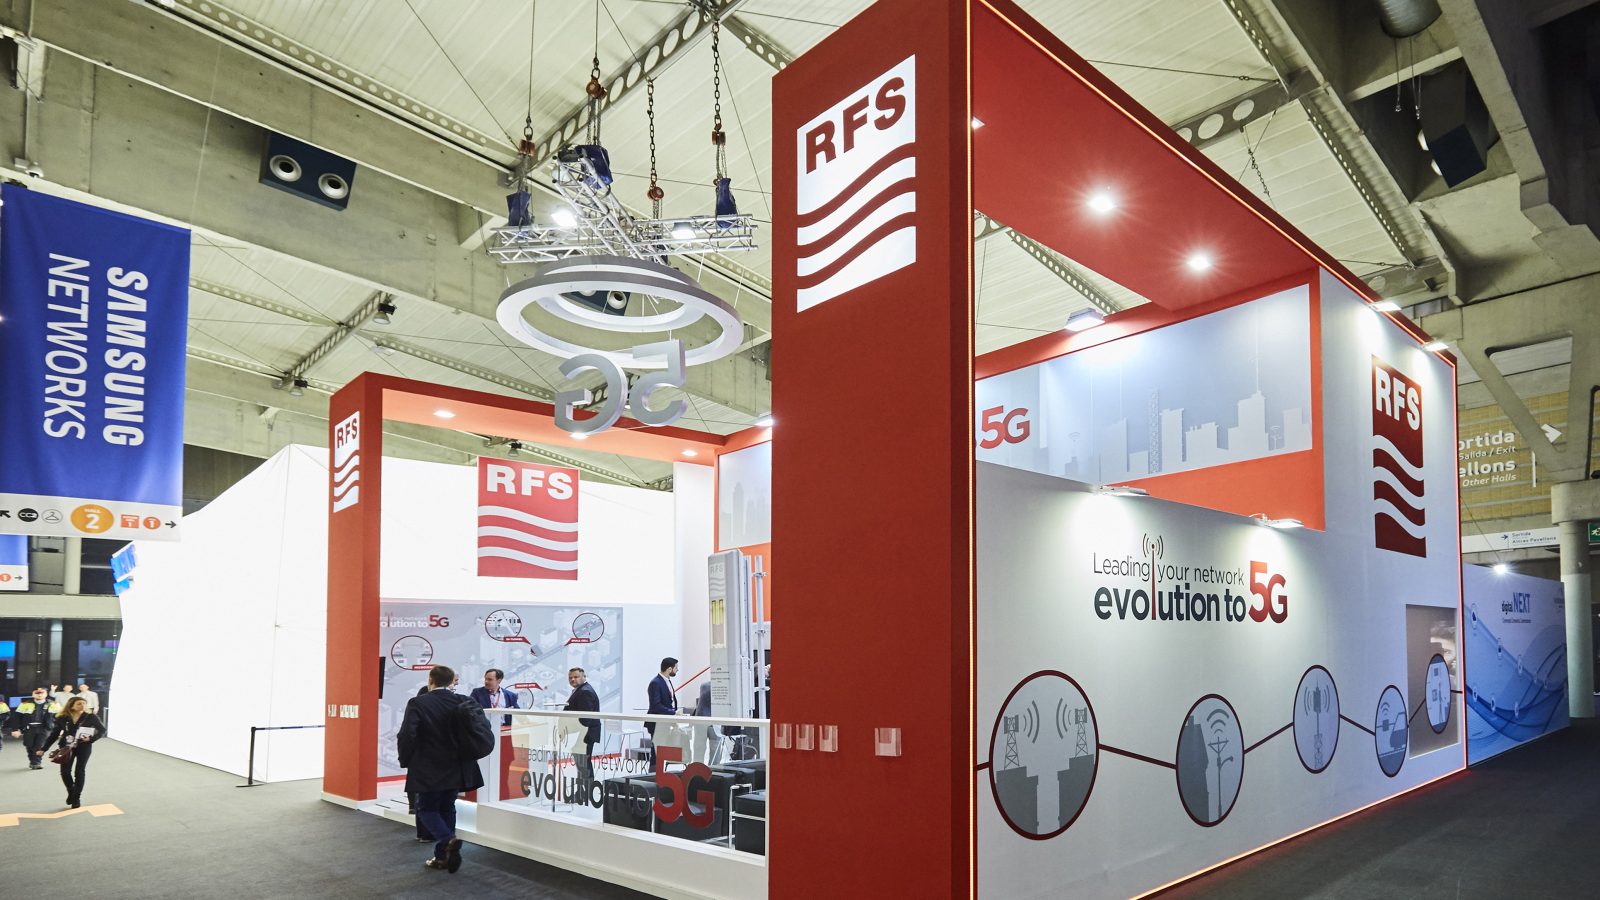 Exhibition stand at MWC 2018 in Barcelona - RFS